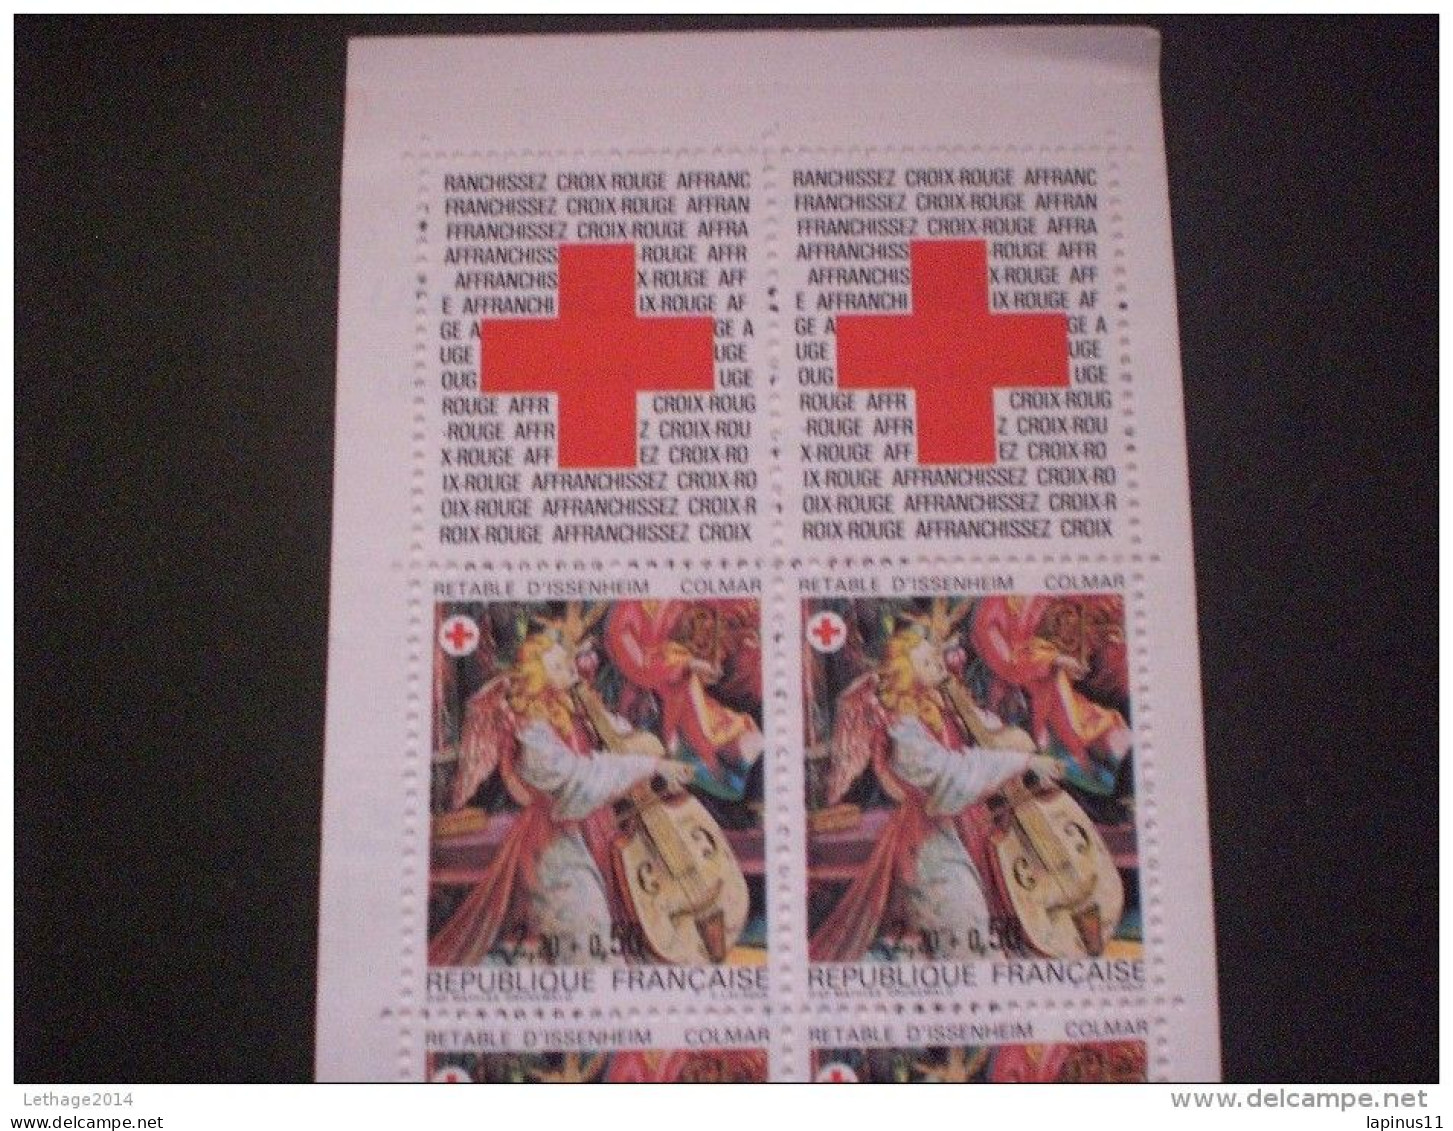 STAMPS FRANCIA CARNETS 1985 RED CROSS - Croix Rouge